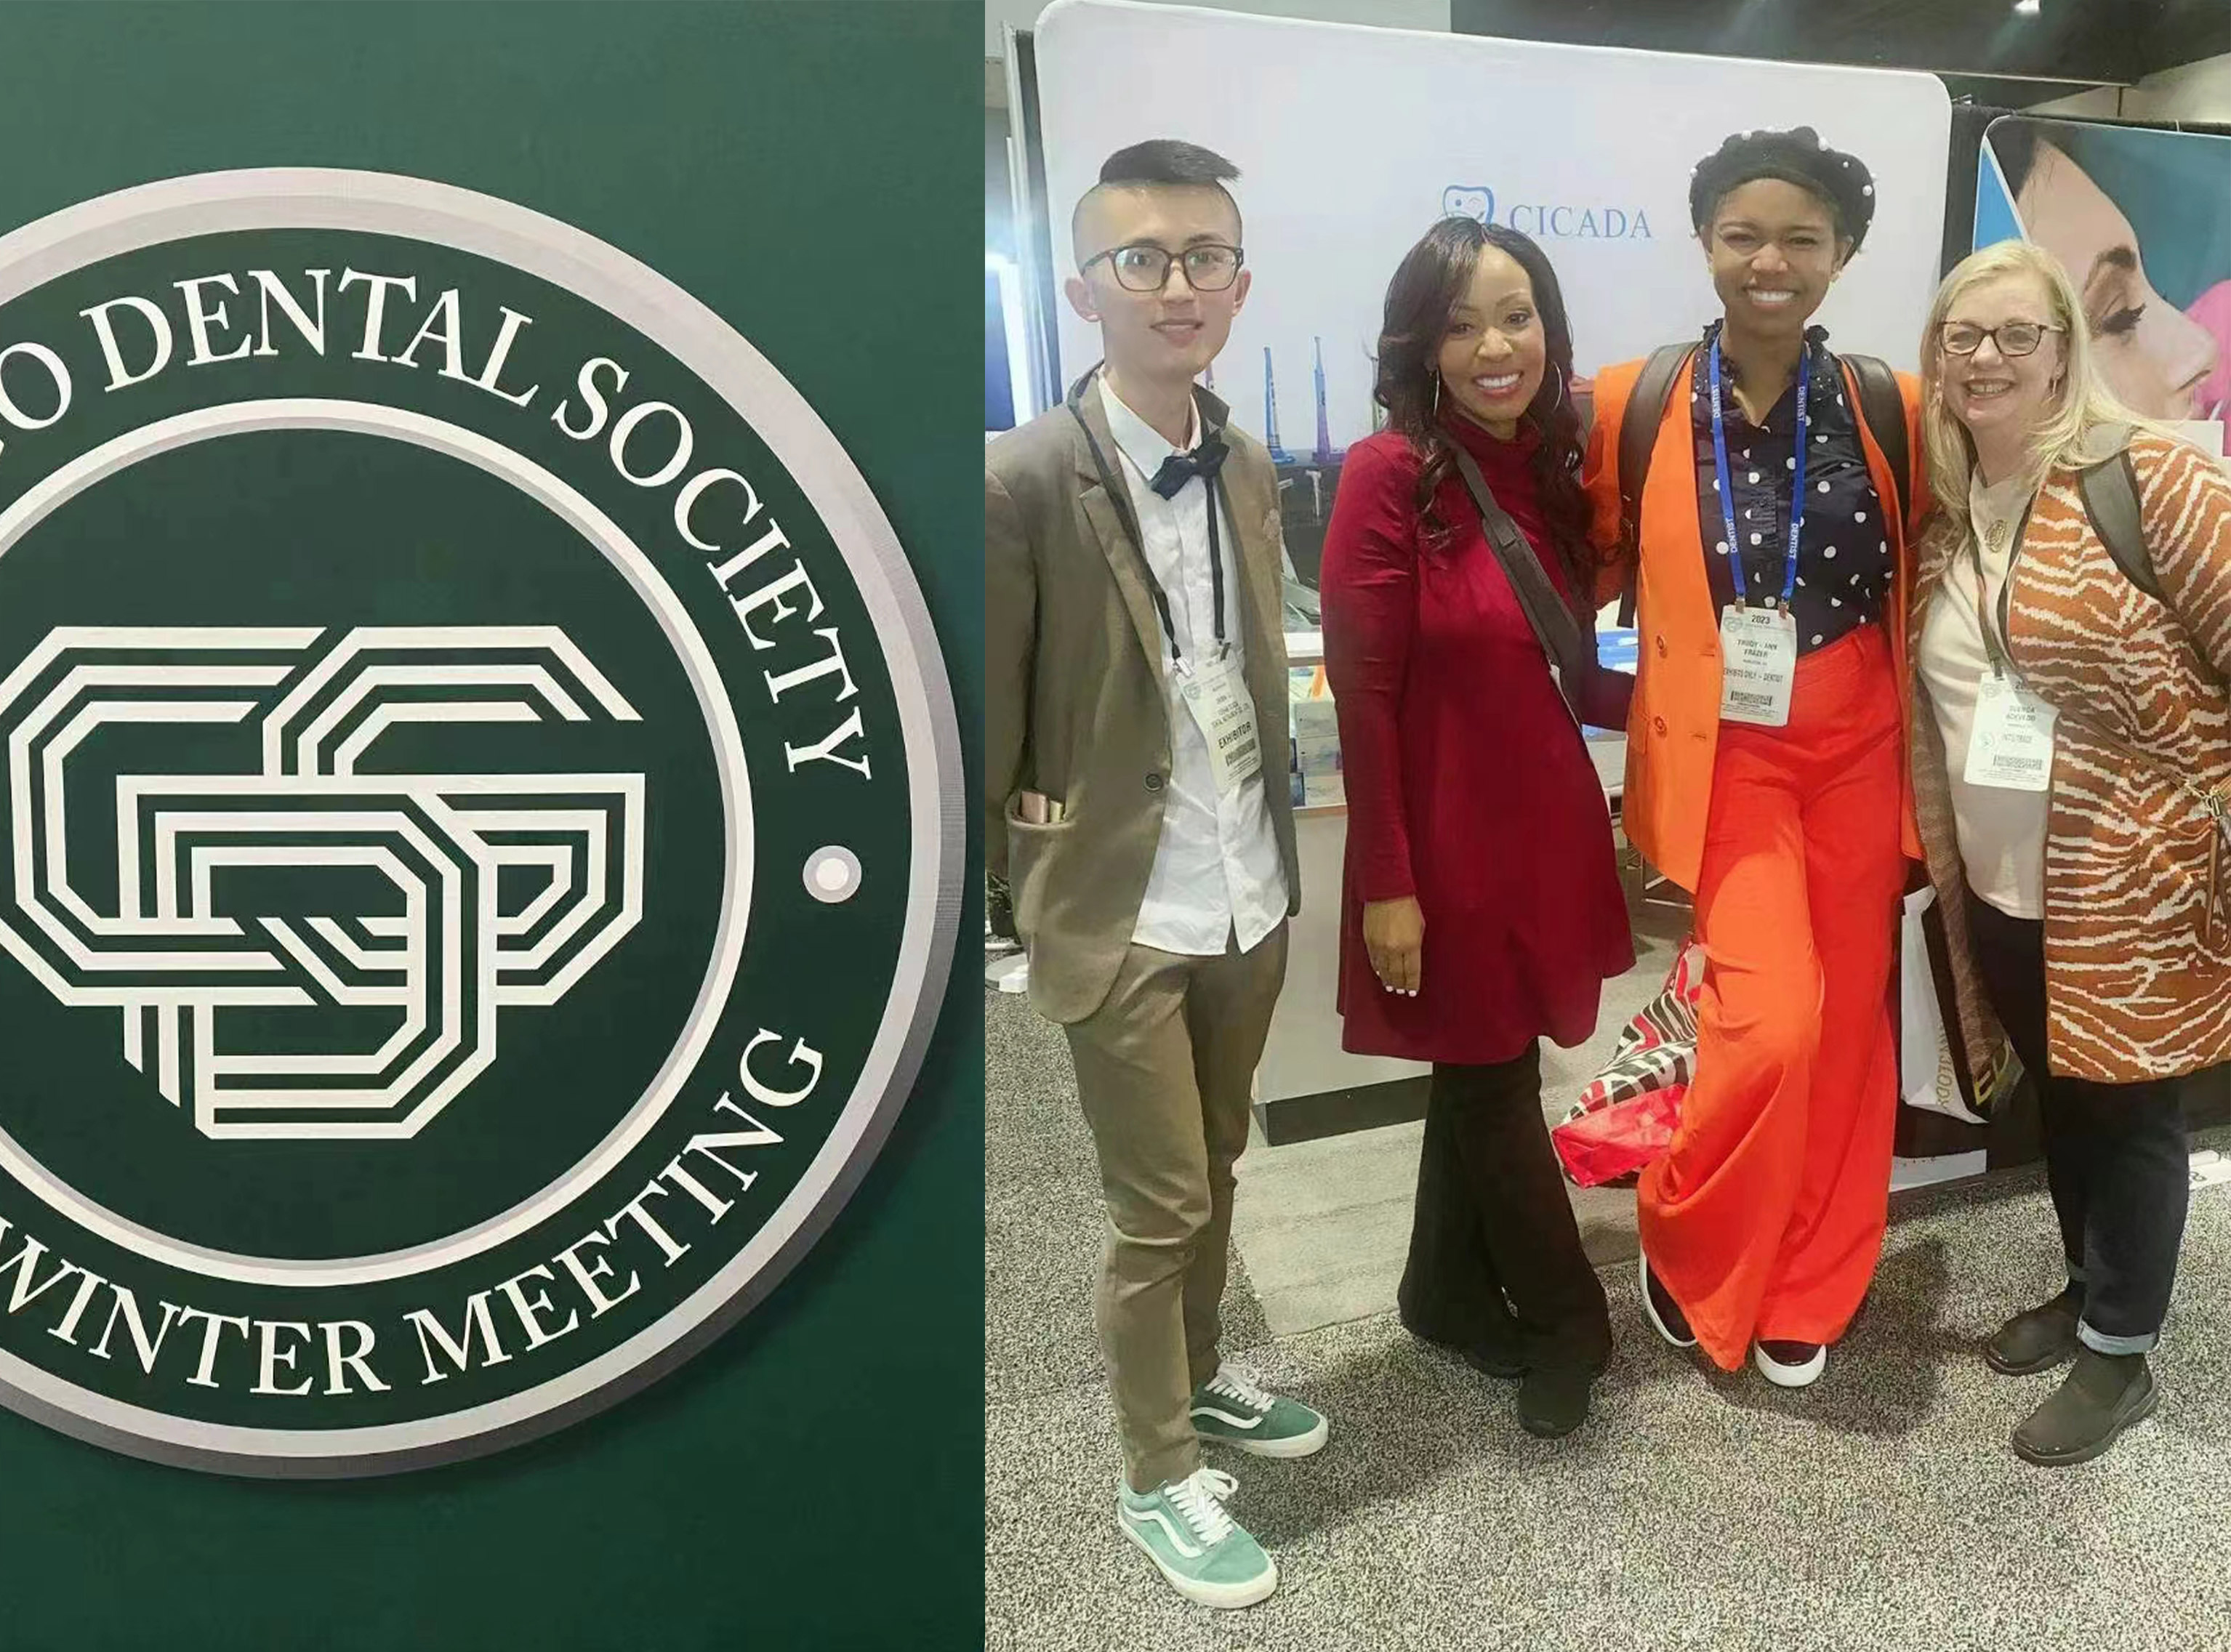 Chicago Dental Society-Midwinter Meeting 2023